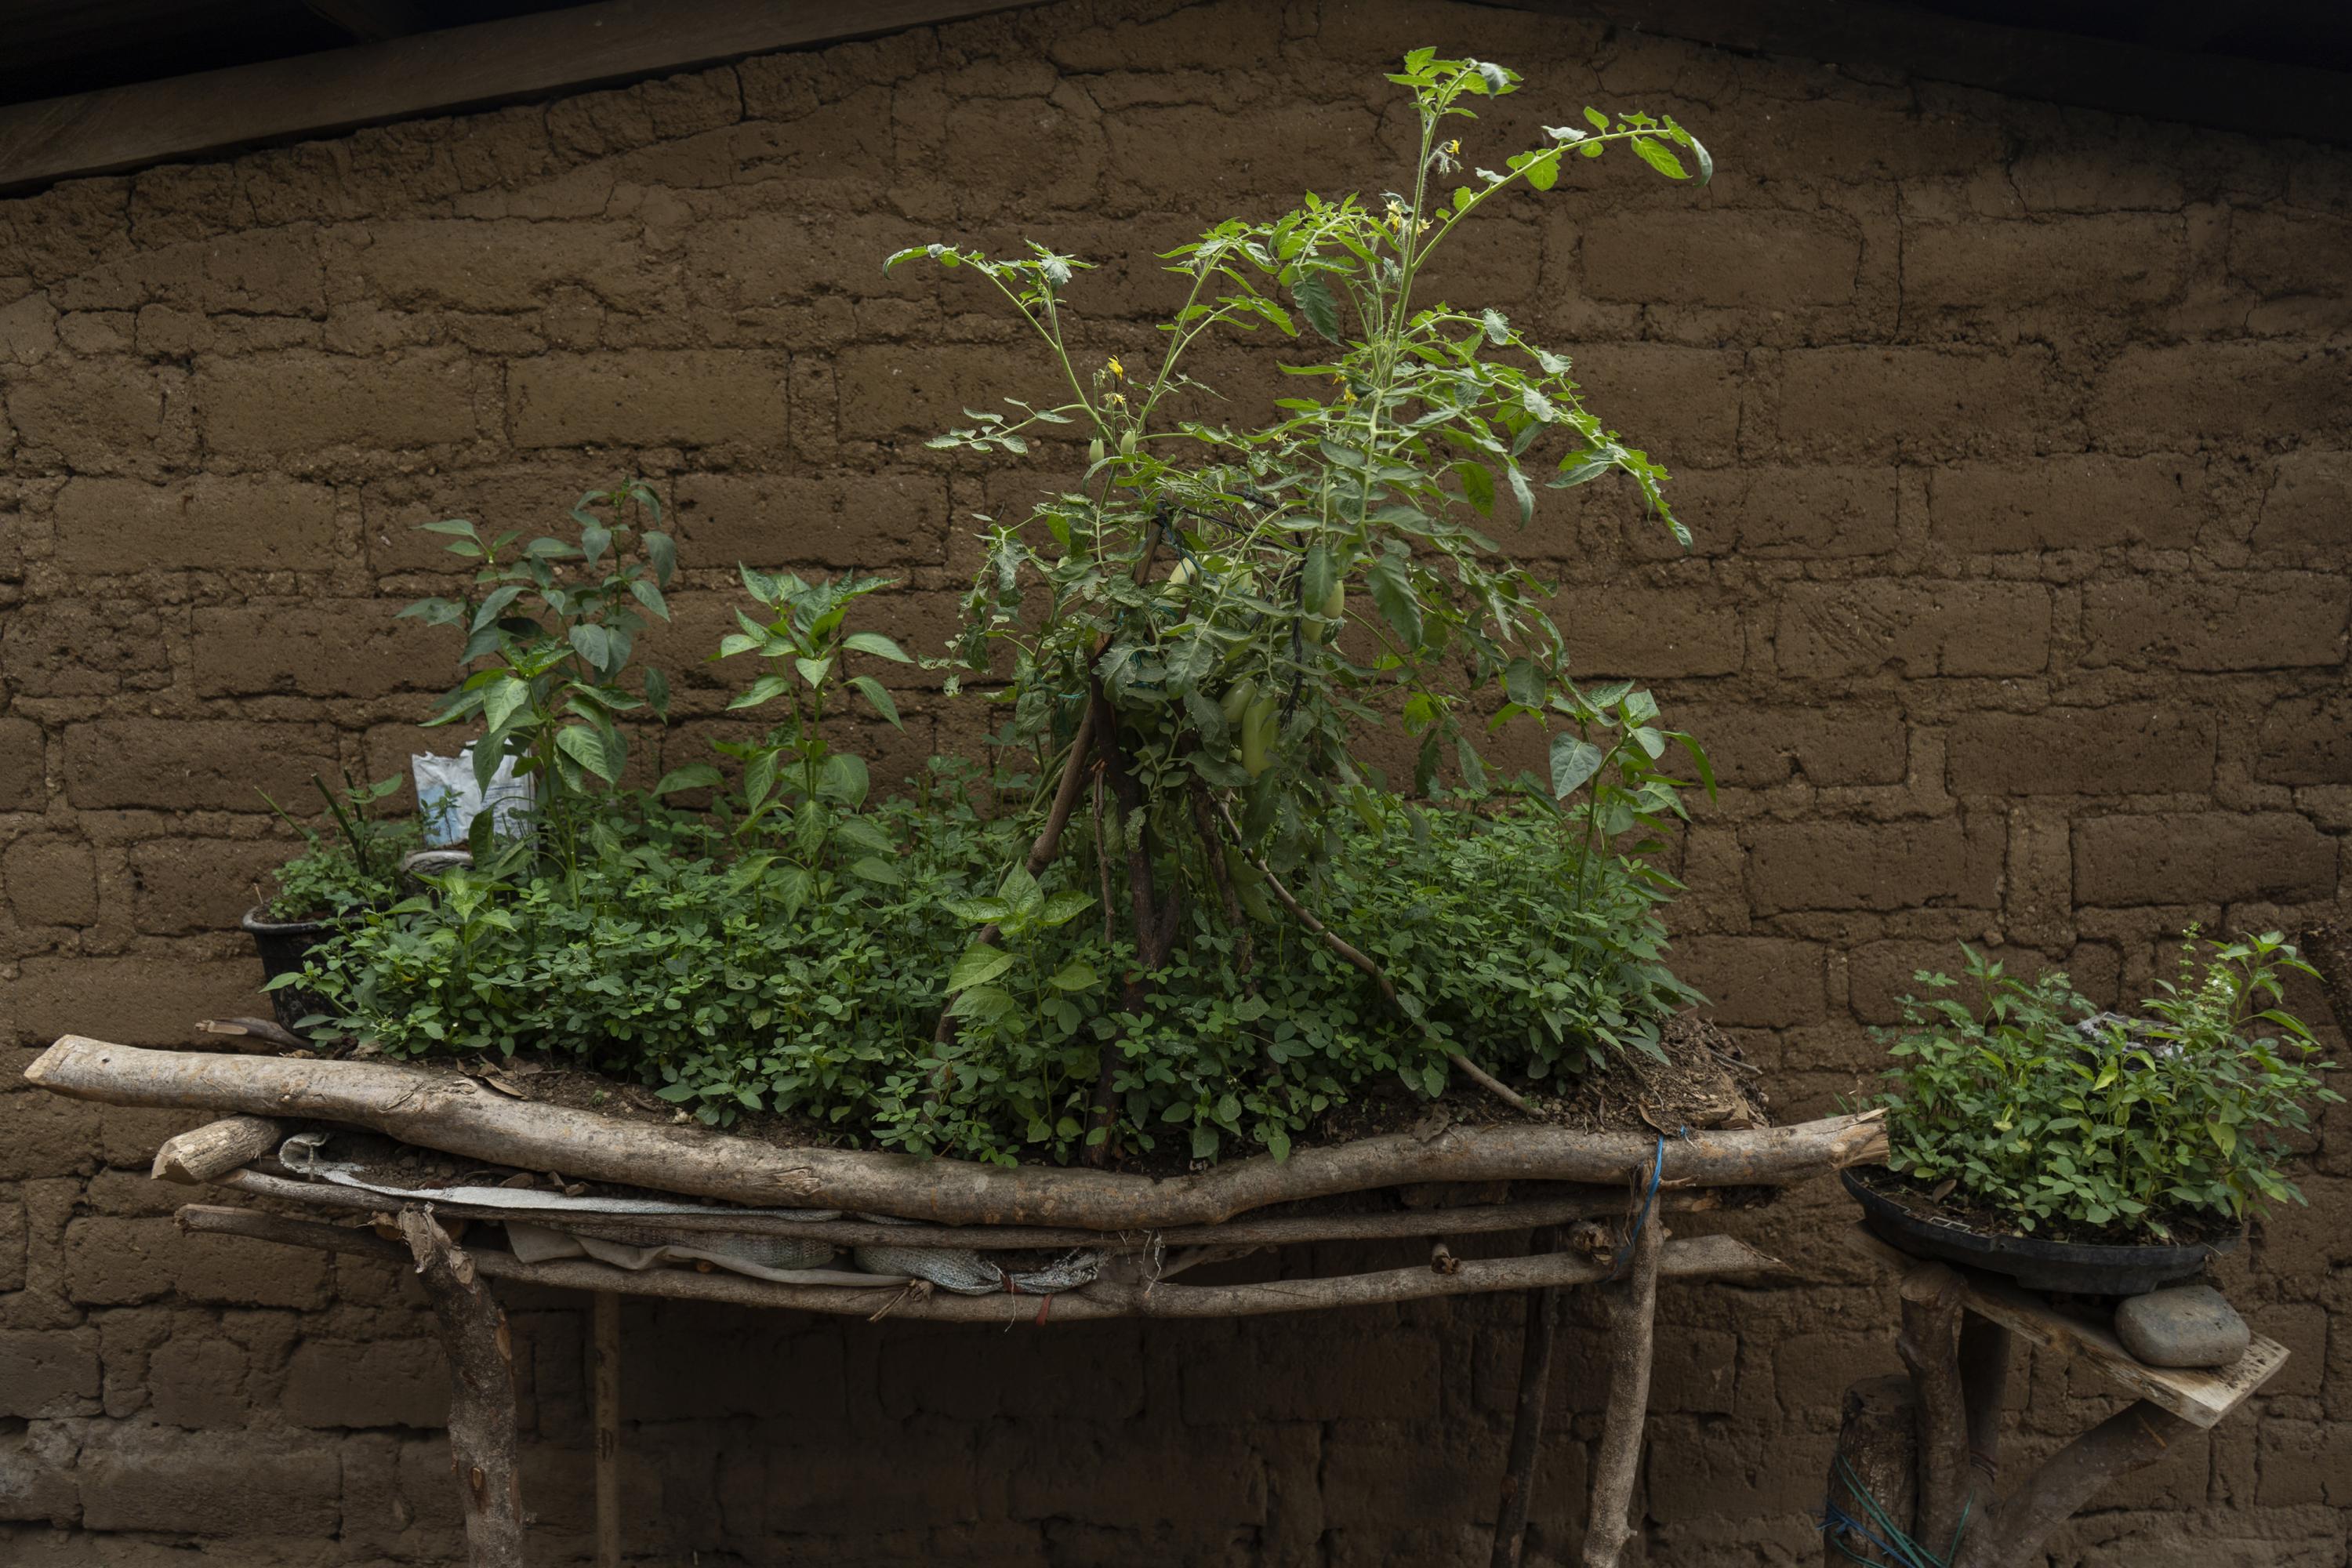 [Photo] Along the wall of her home, Maura has improvised a garden with green peppers, tomatoes, mint, basil, and chipilín. She feeds her children with this when she runs out of beans and rice. Photo Víctor Peña